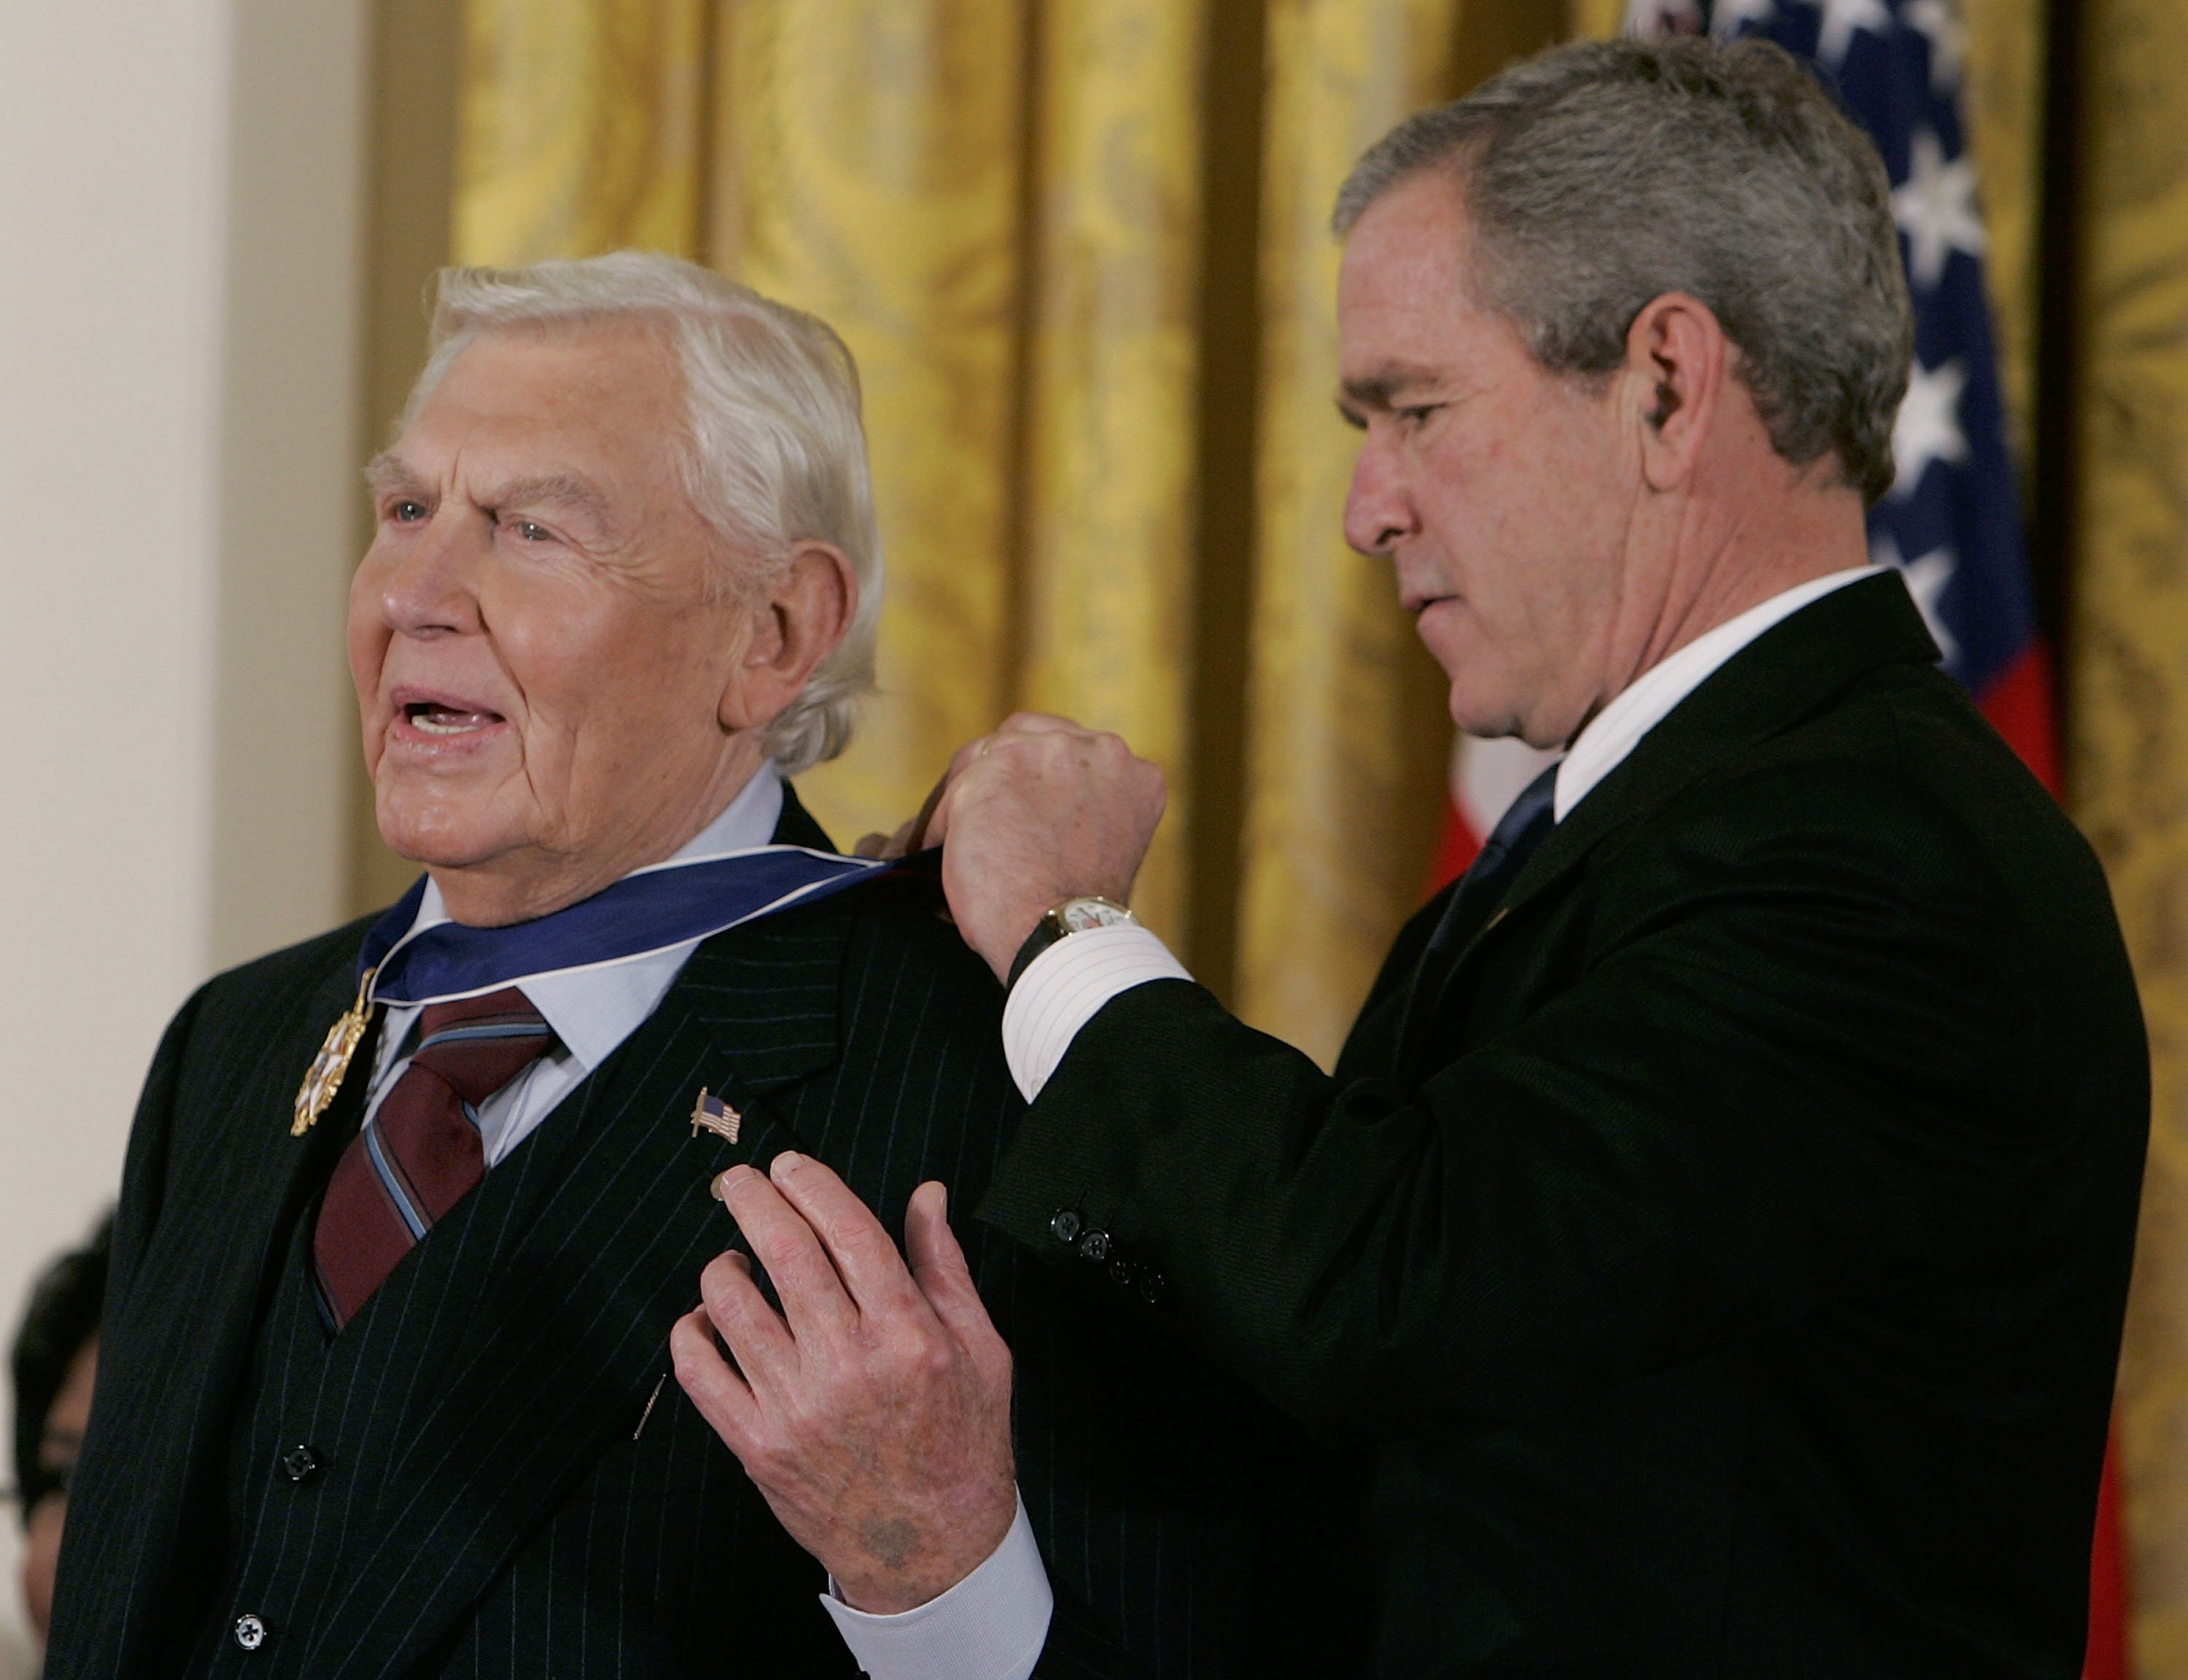 Andy Griffith recieves the Medal of Freedom from the then U.S. President George W. Bush. | Source: Getty Images